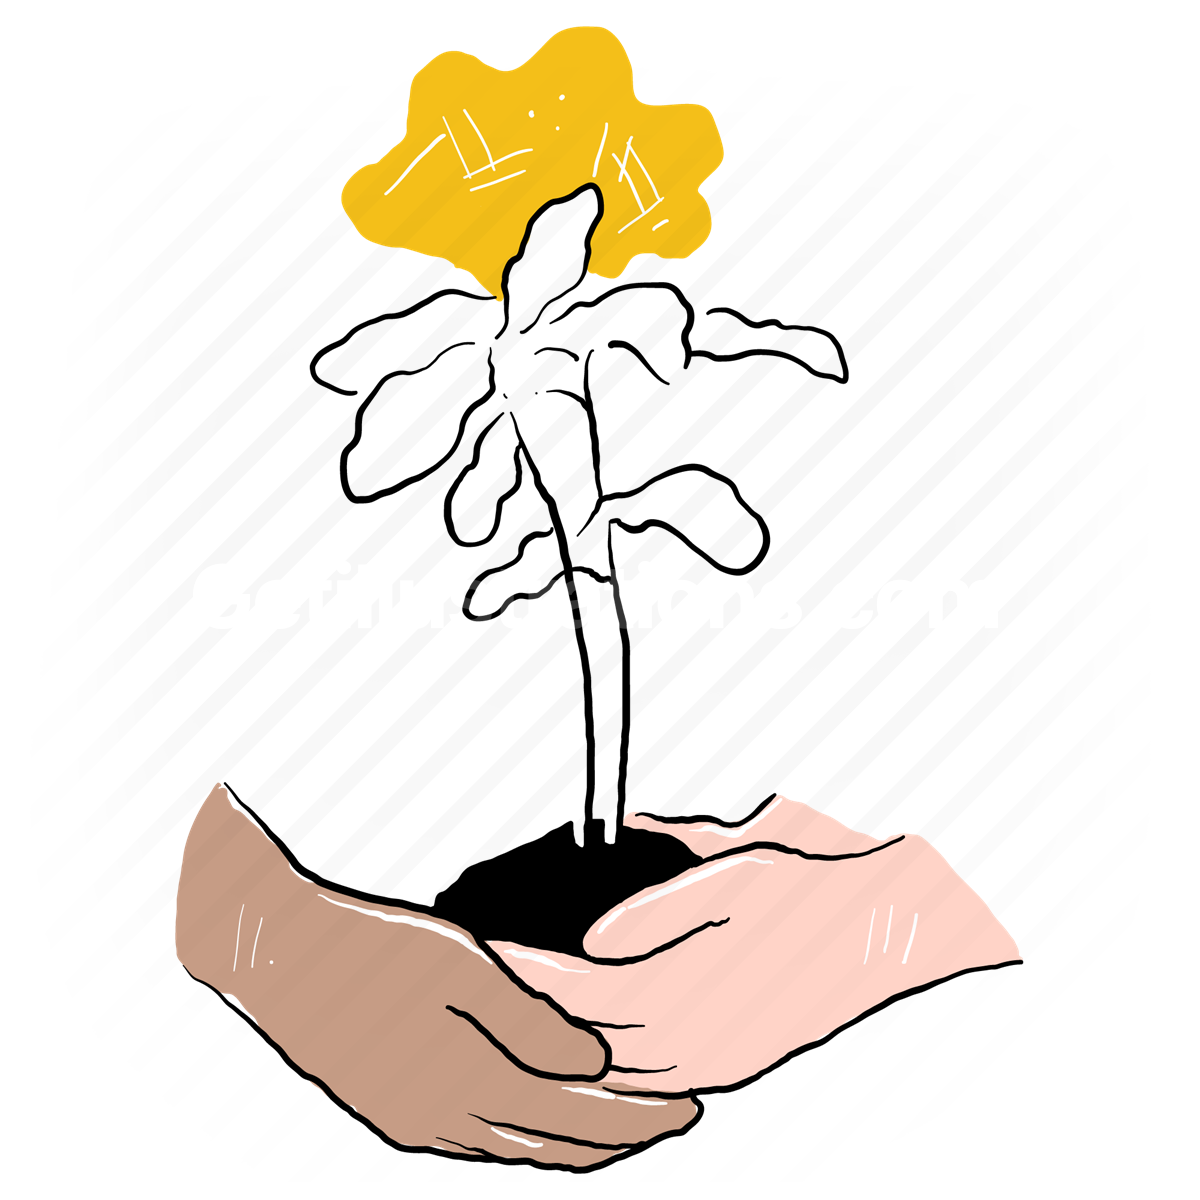 hand, gesture, plant, growth, investment, savings, hands